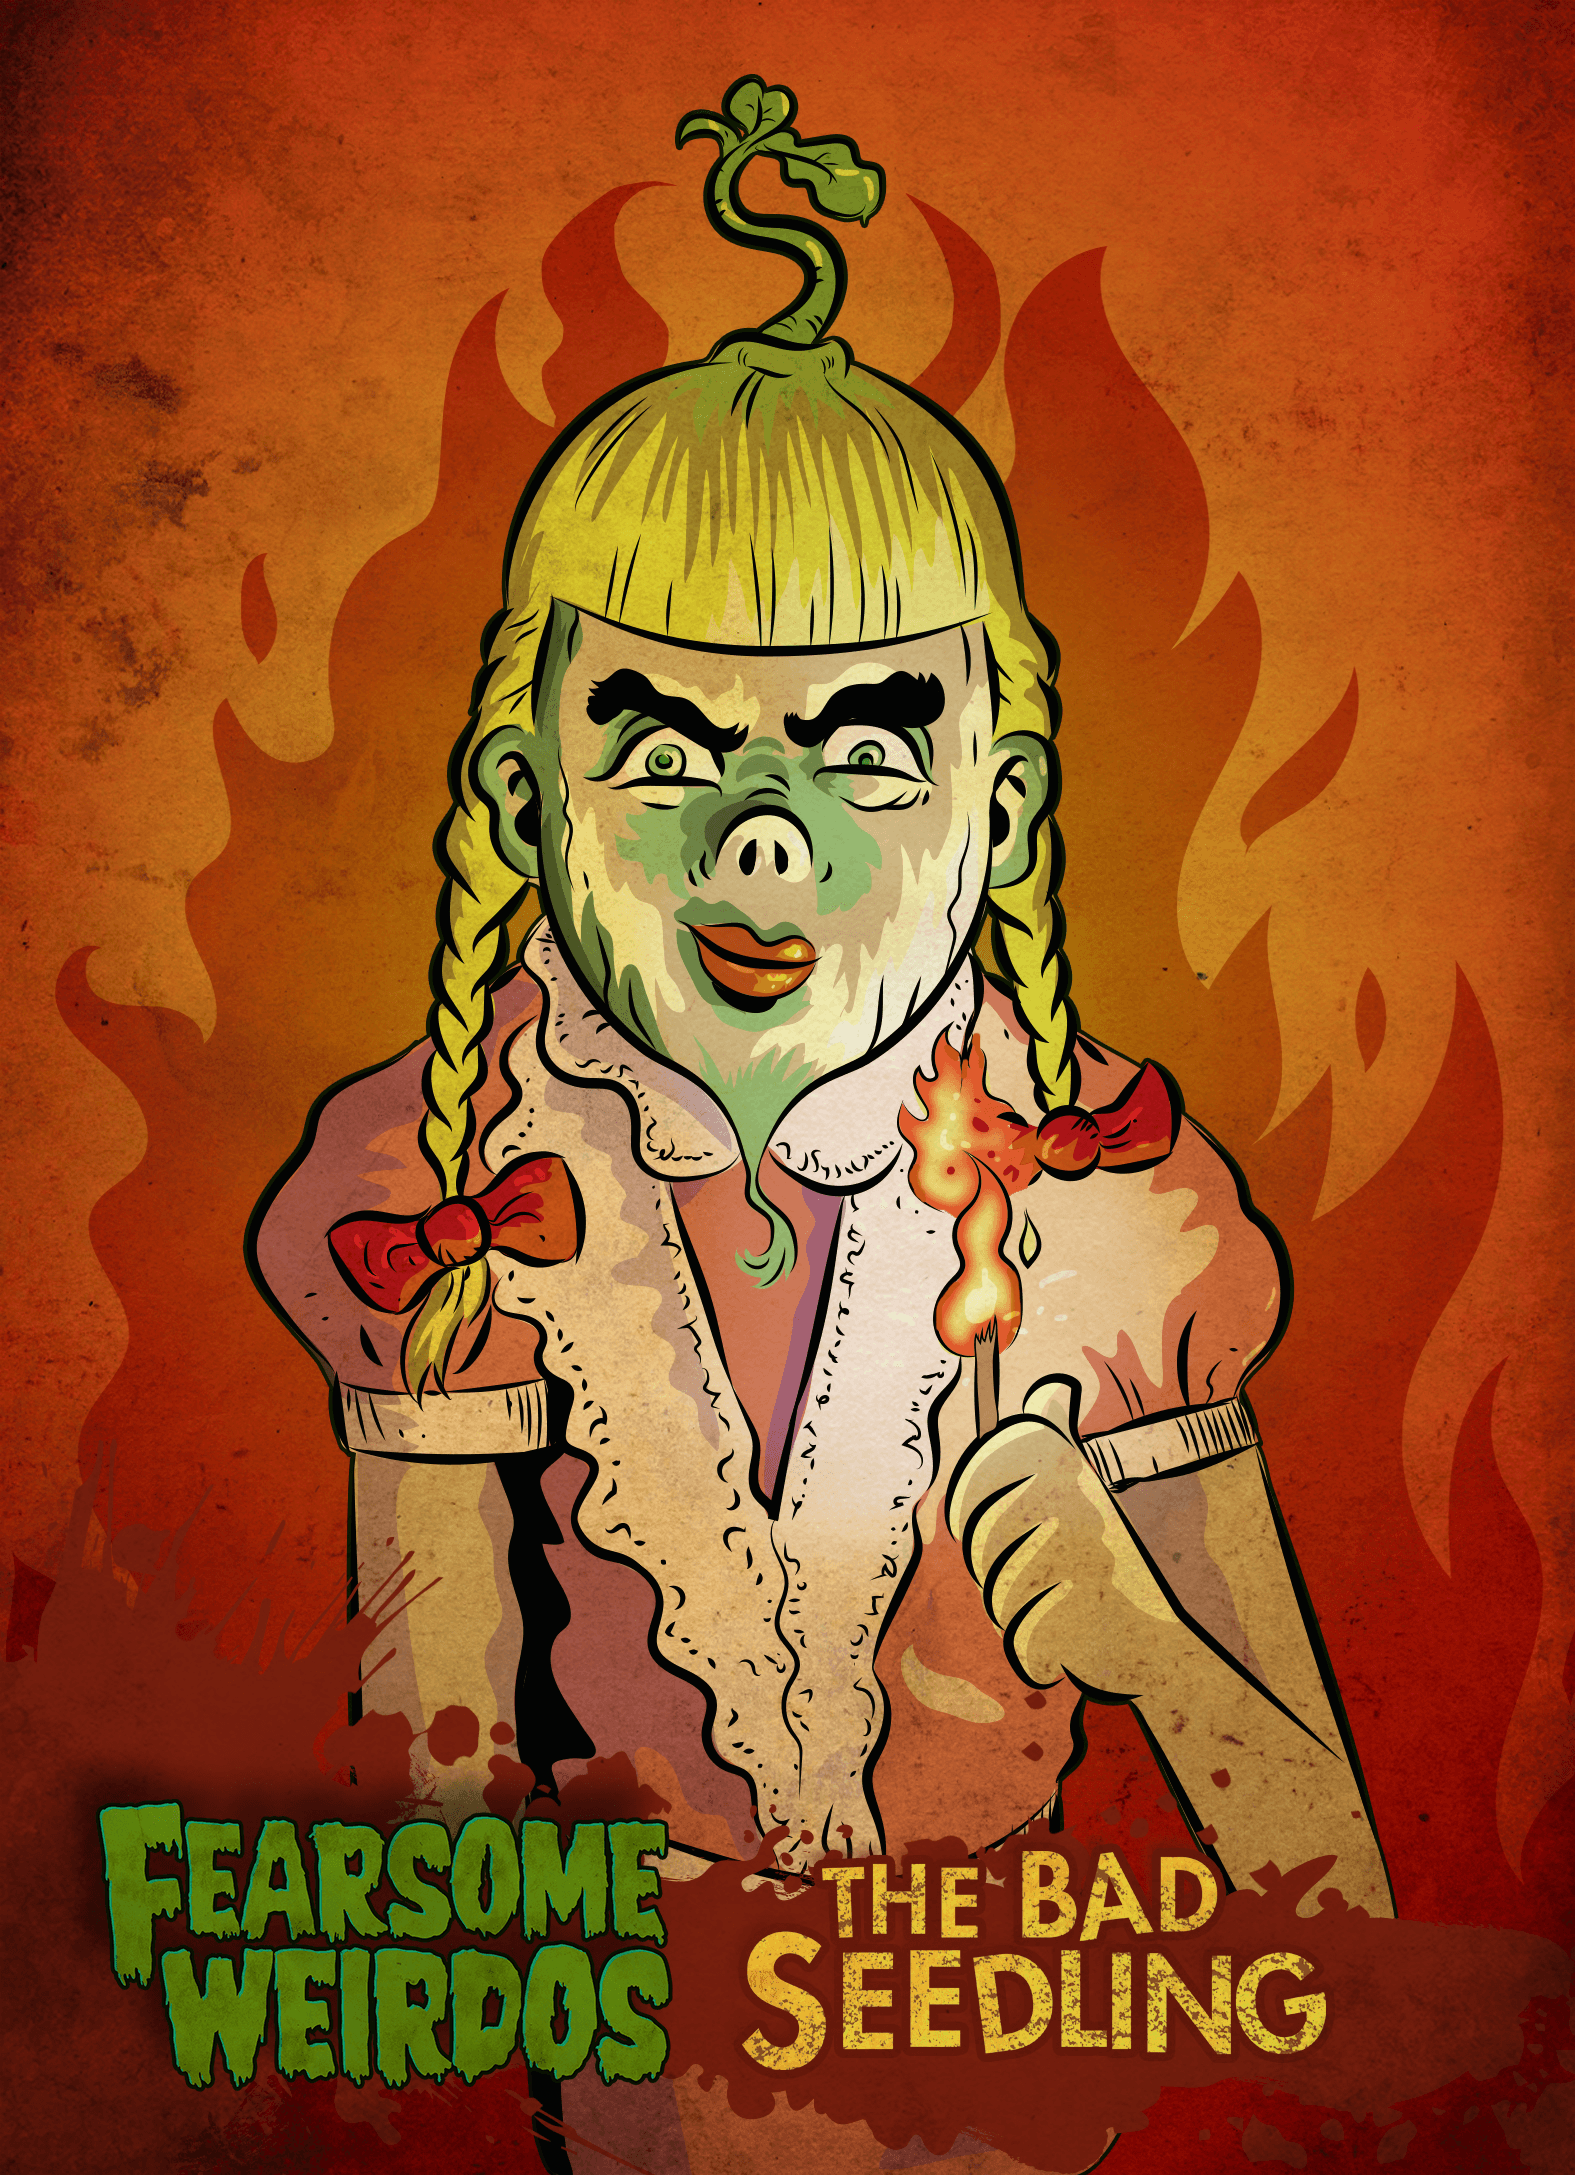 Fearsome Weirdos Series 1 The Bad Seedling